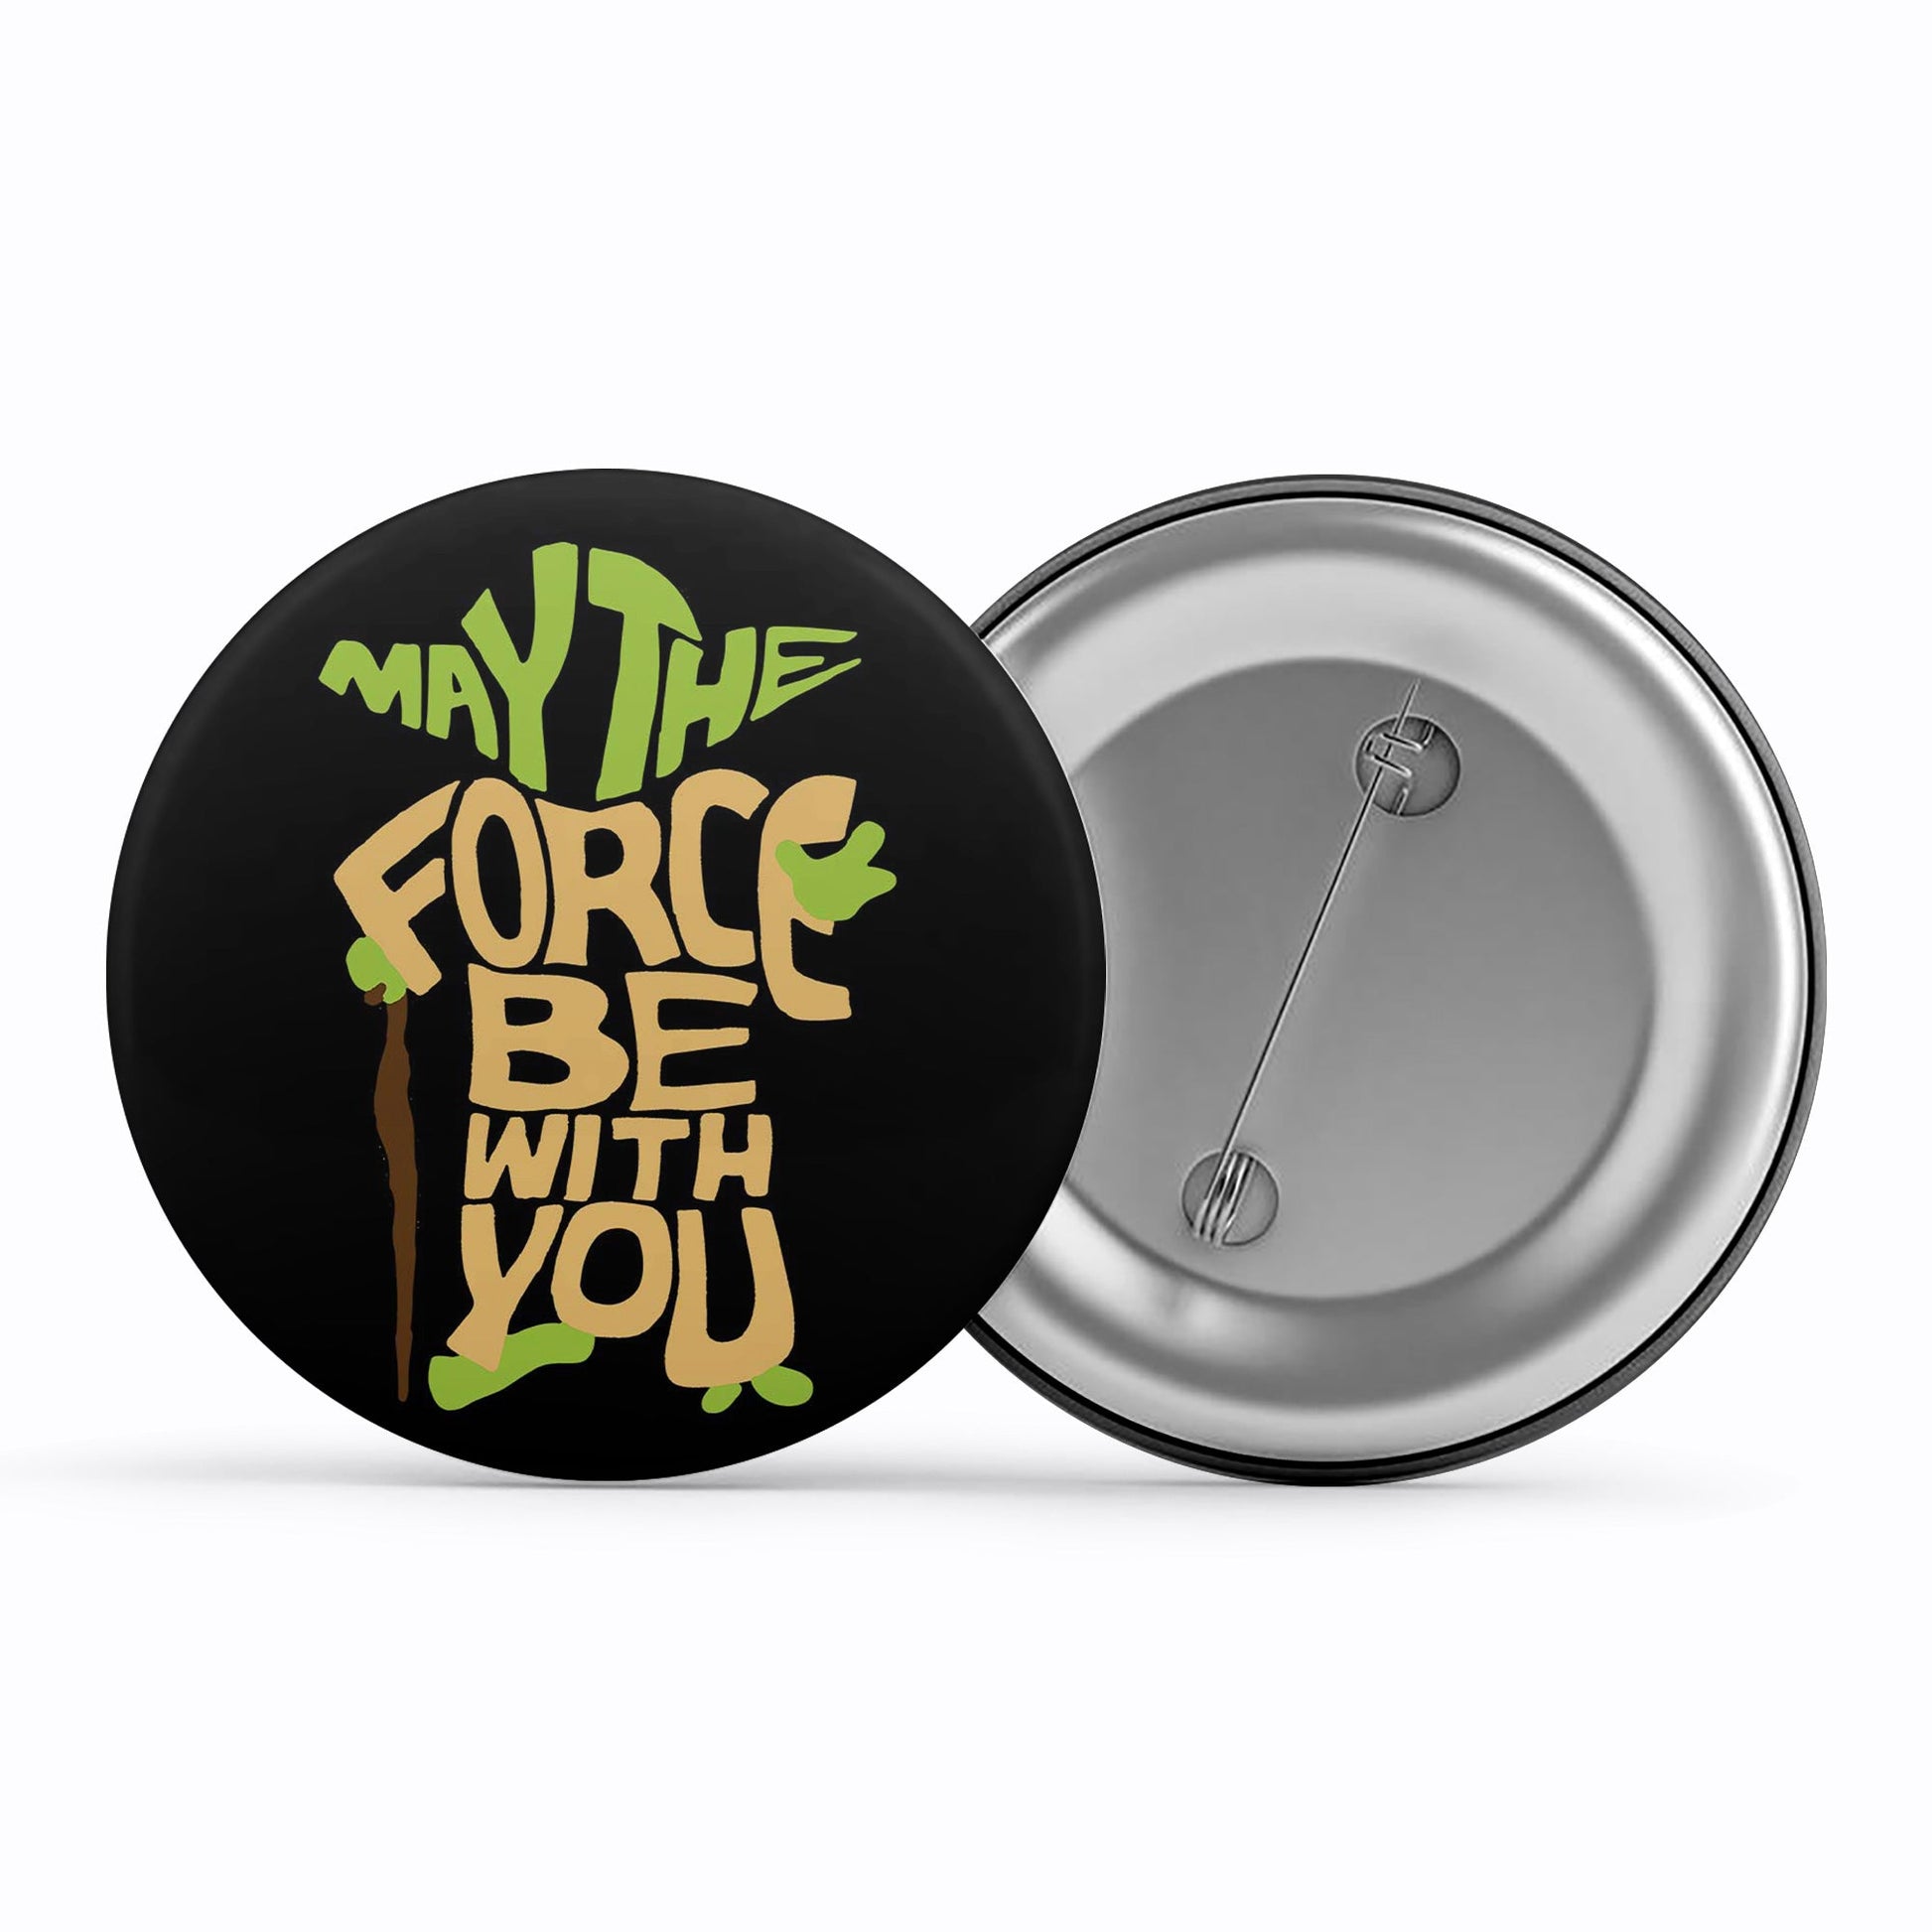 star wars may the force be with you badge pin button tv & movies buy online india the banyan tee tbt men women girls boys unisex  yoda